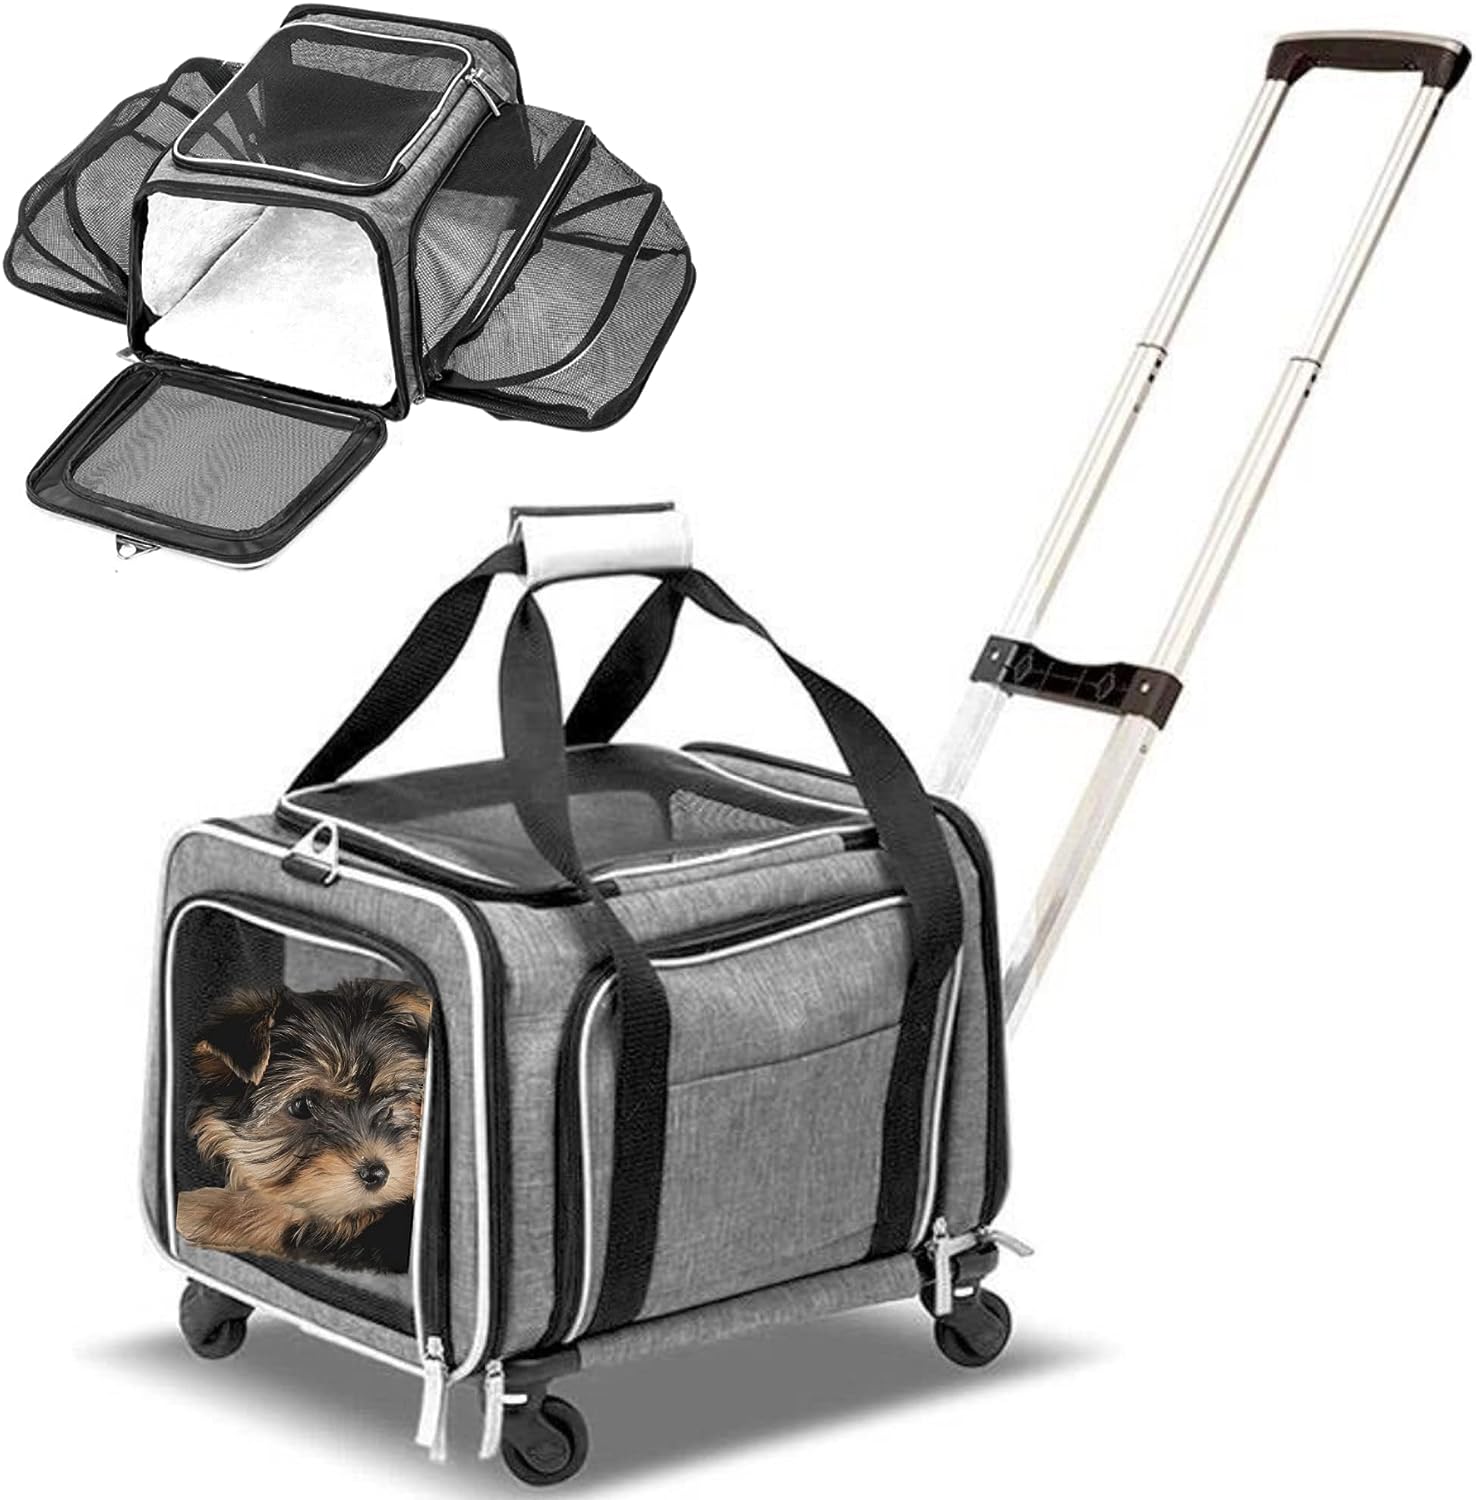 Ruff Life 101 Expandable Airline Approved Carrier with Wheels